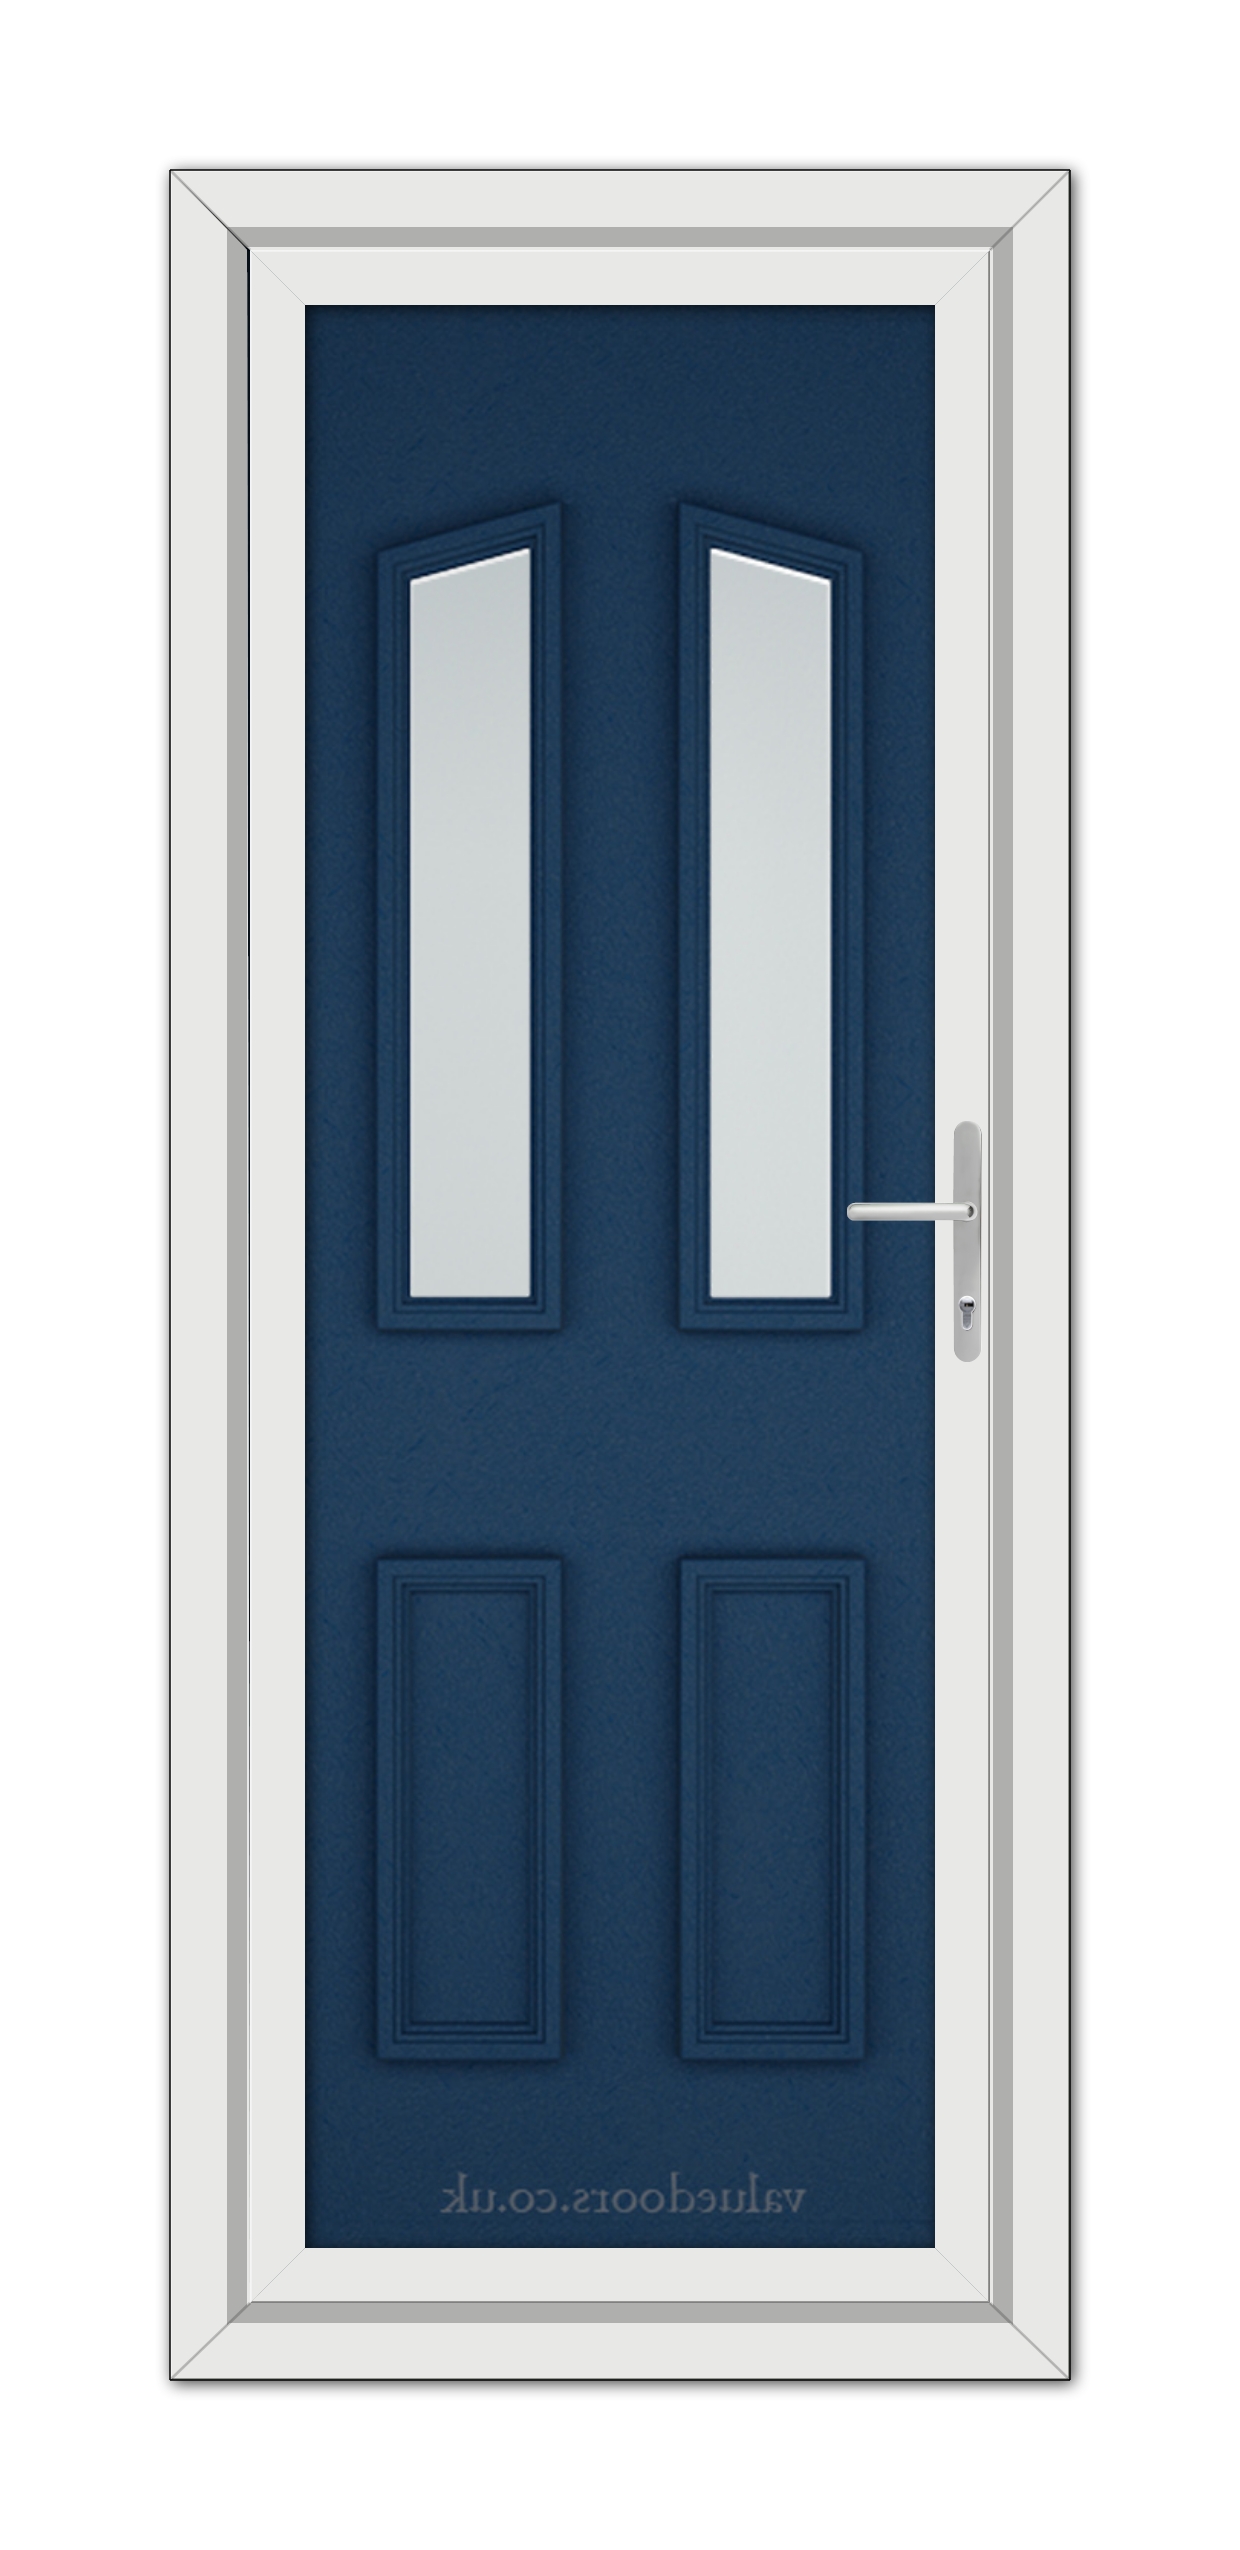 A modern Blue Kensington uPVC door with long, vertical, frosted glass panels and a chrome door handle, set in a white frame.